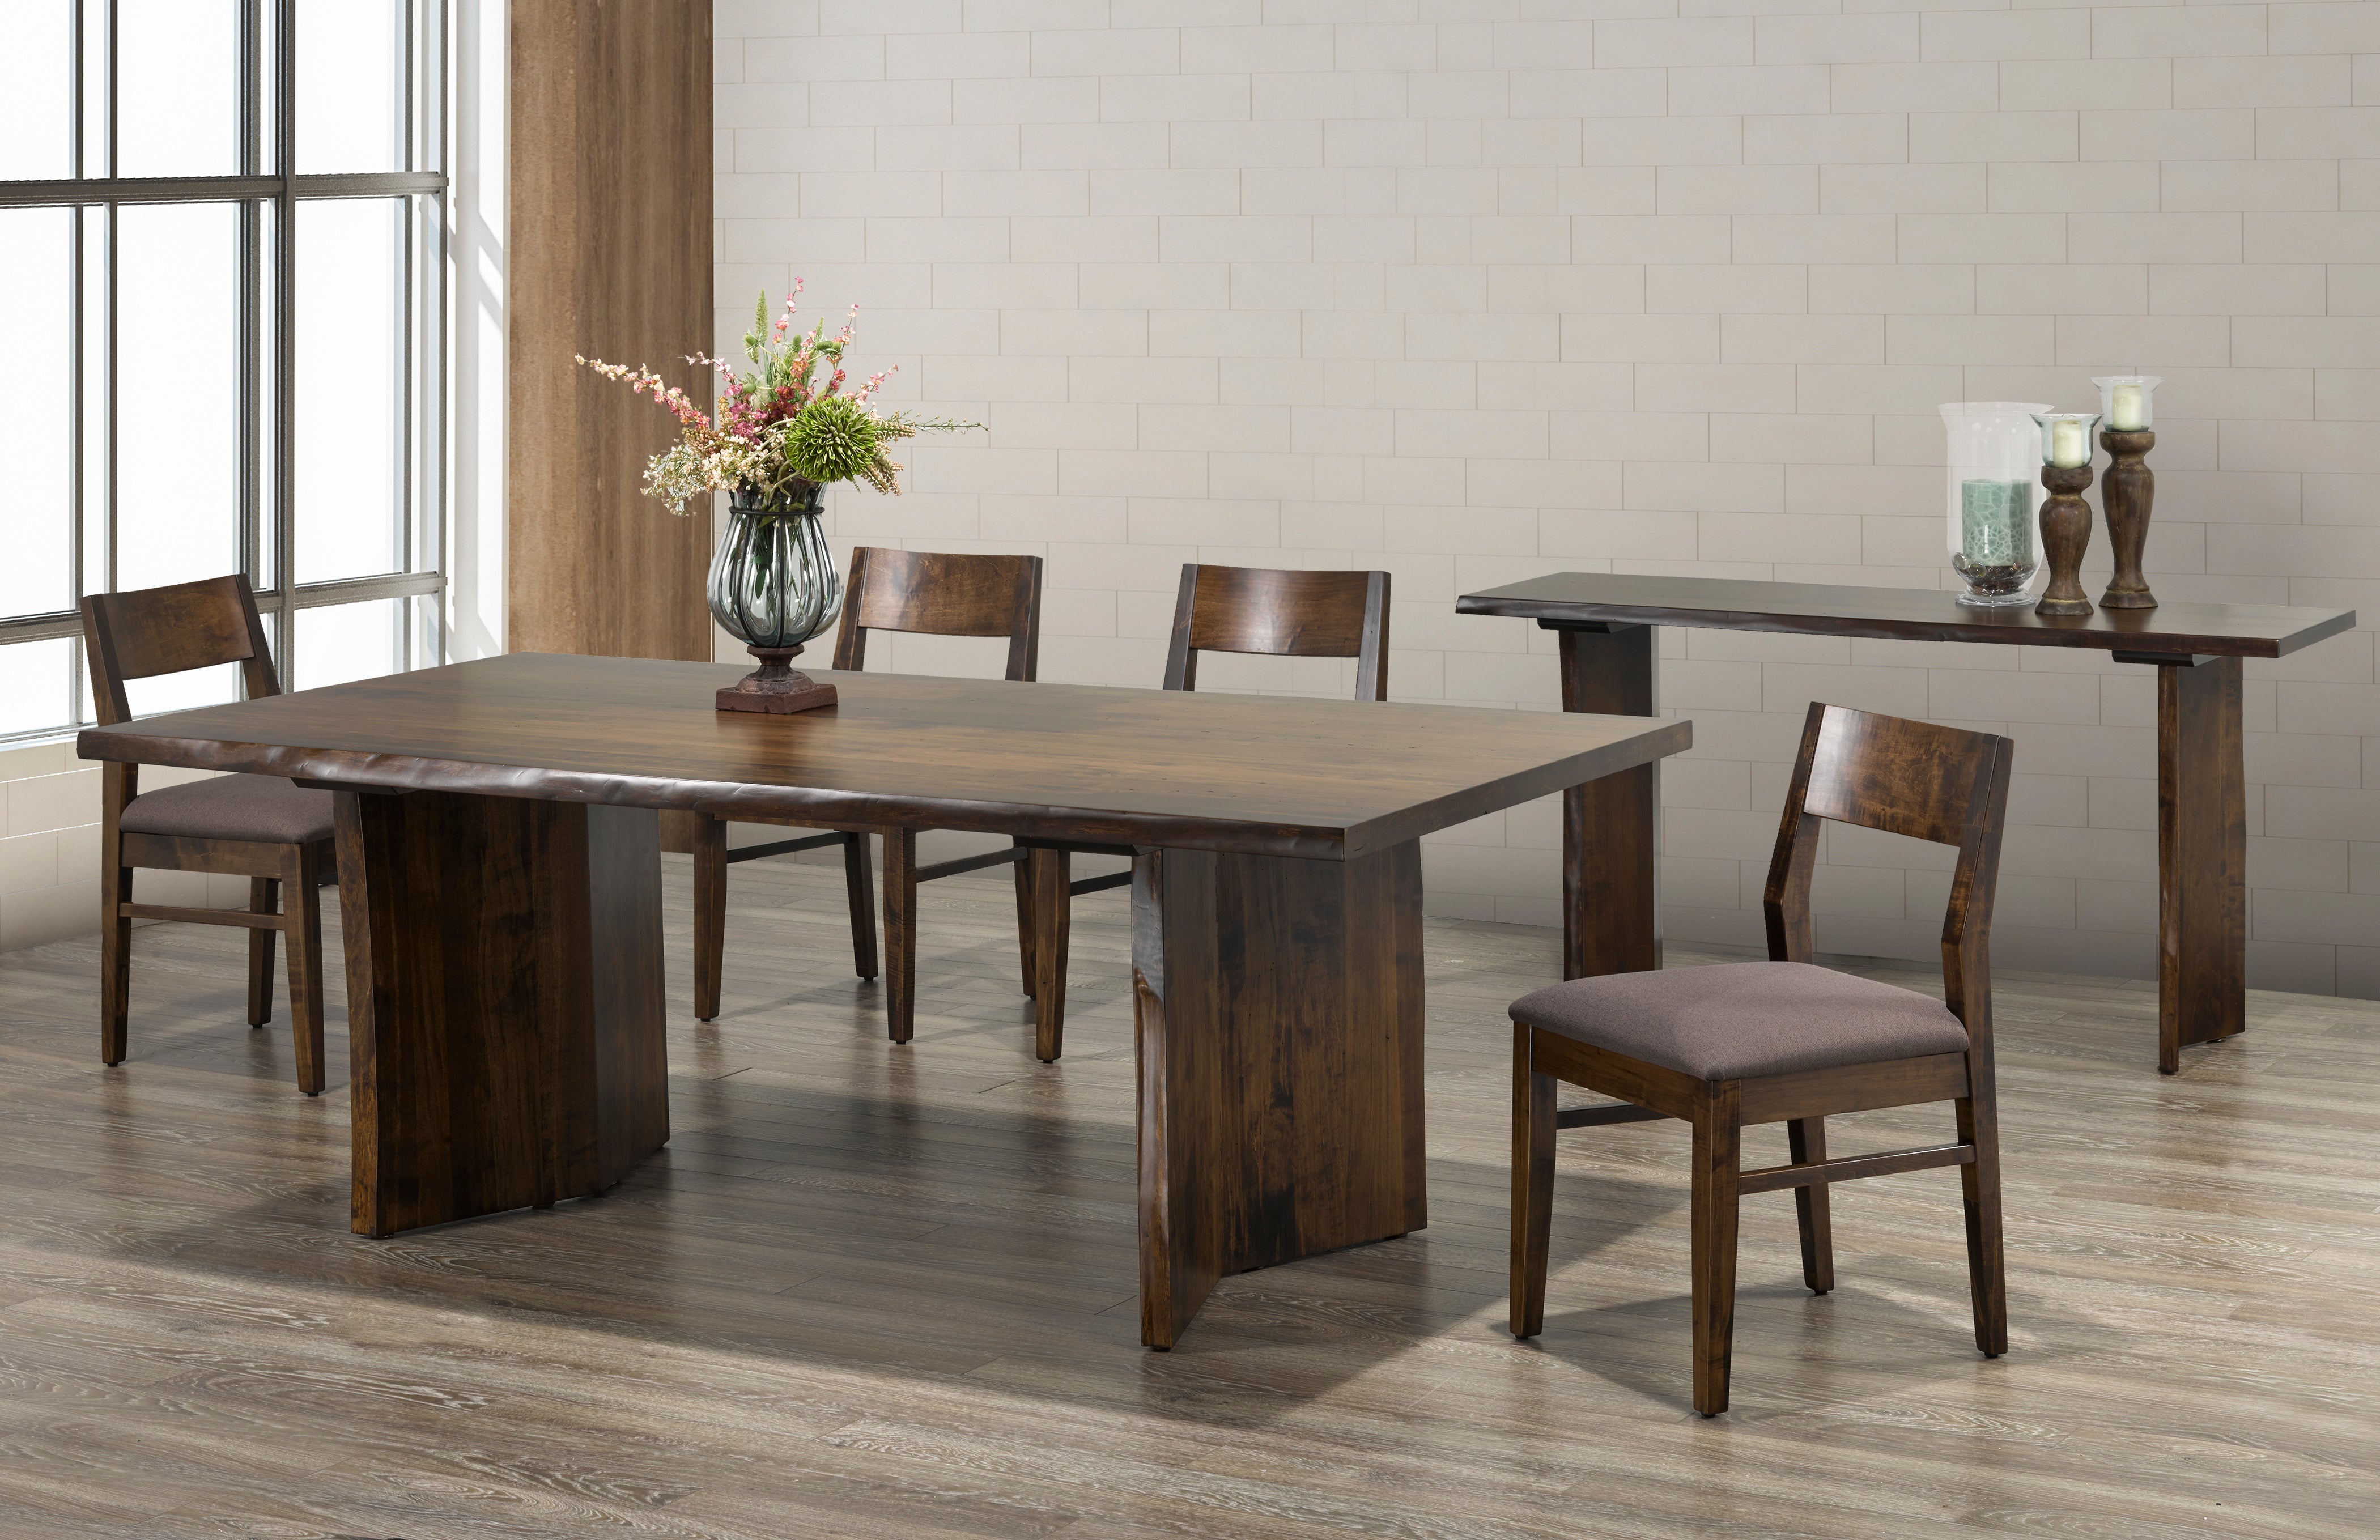 Chair as Shown | Cardinal Woodcraft Stanford Dining Chair - Arcadia | Valley Ridge Furniture